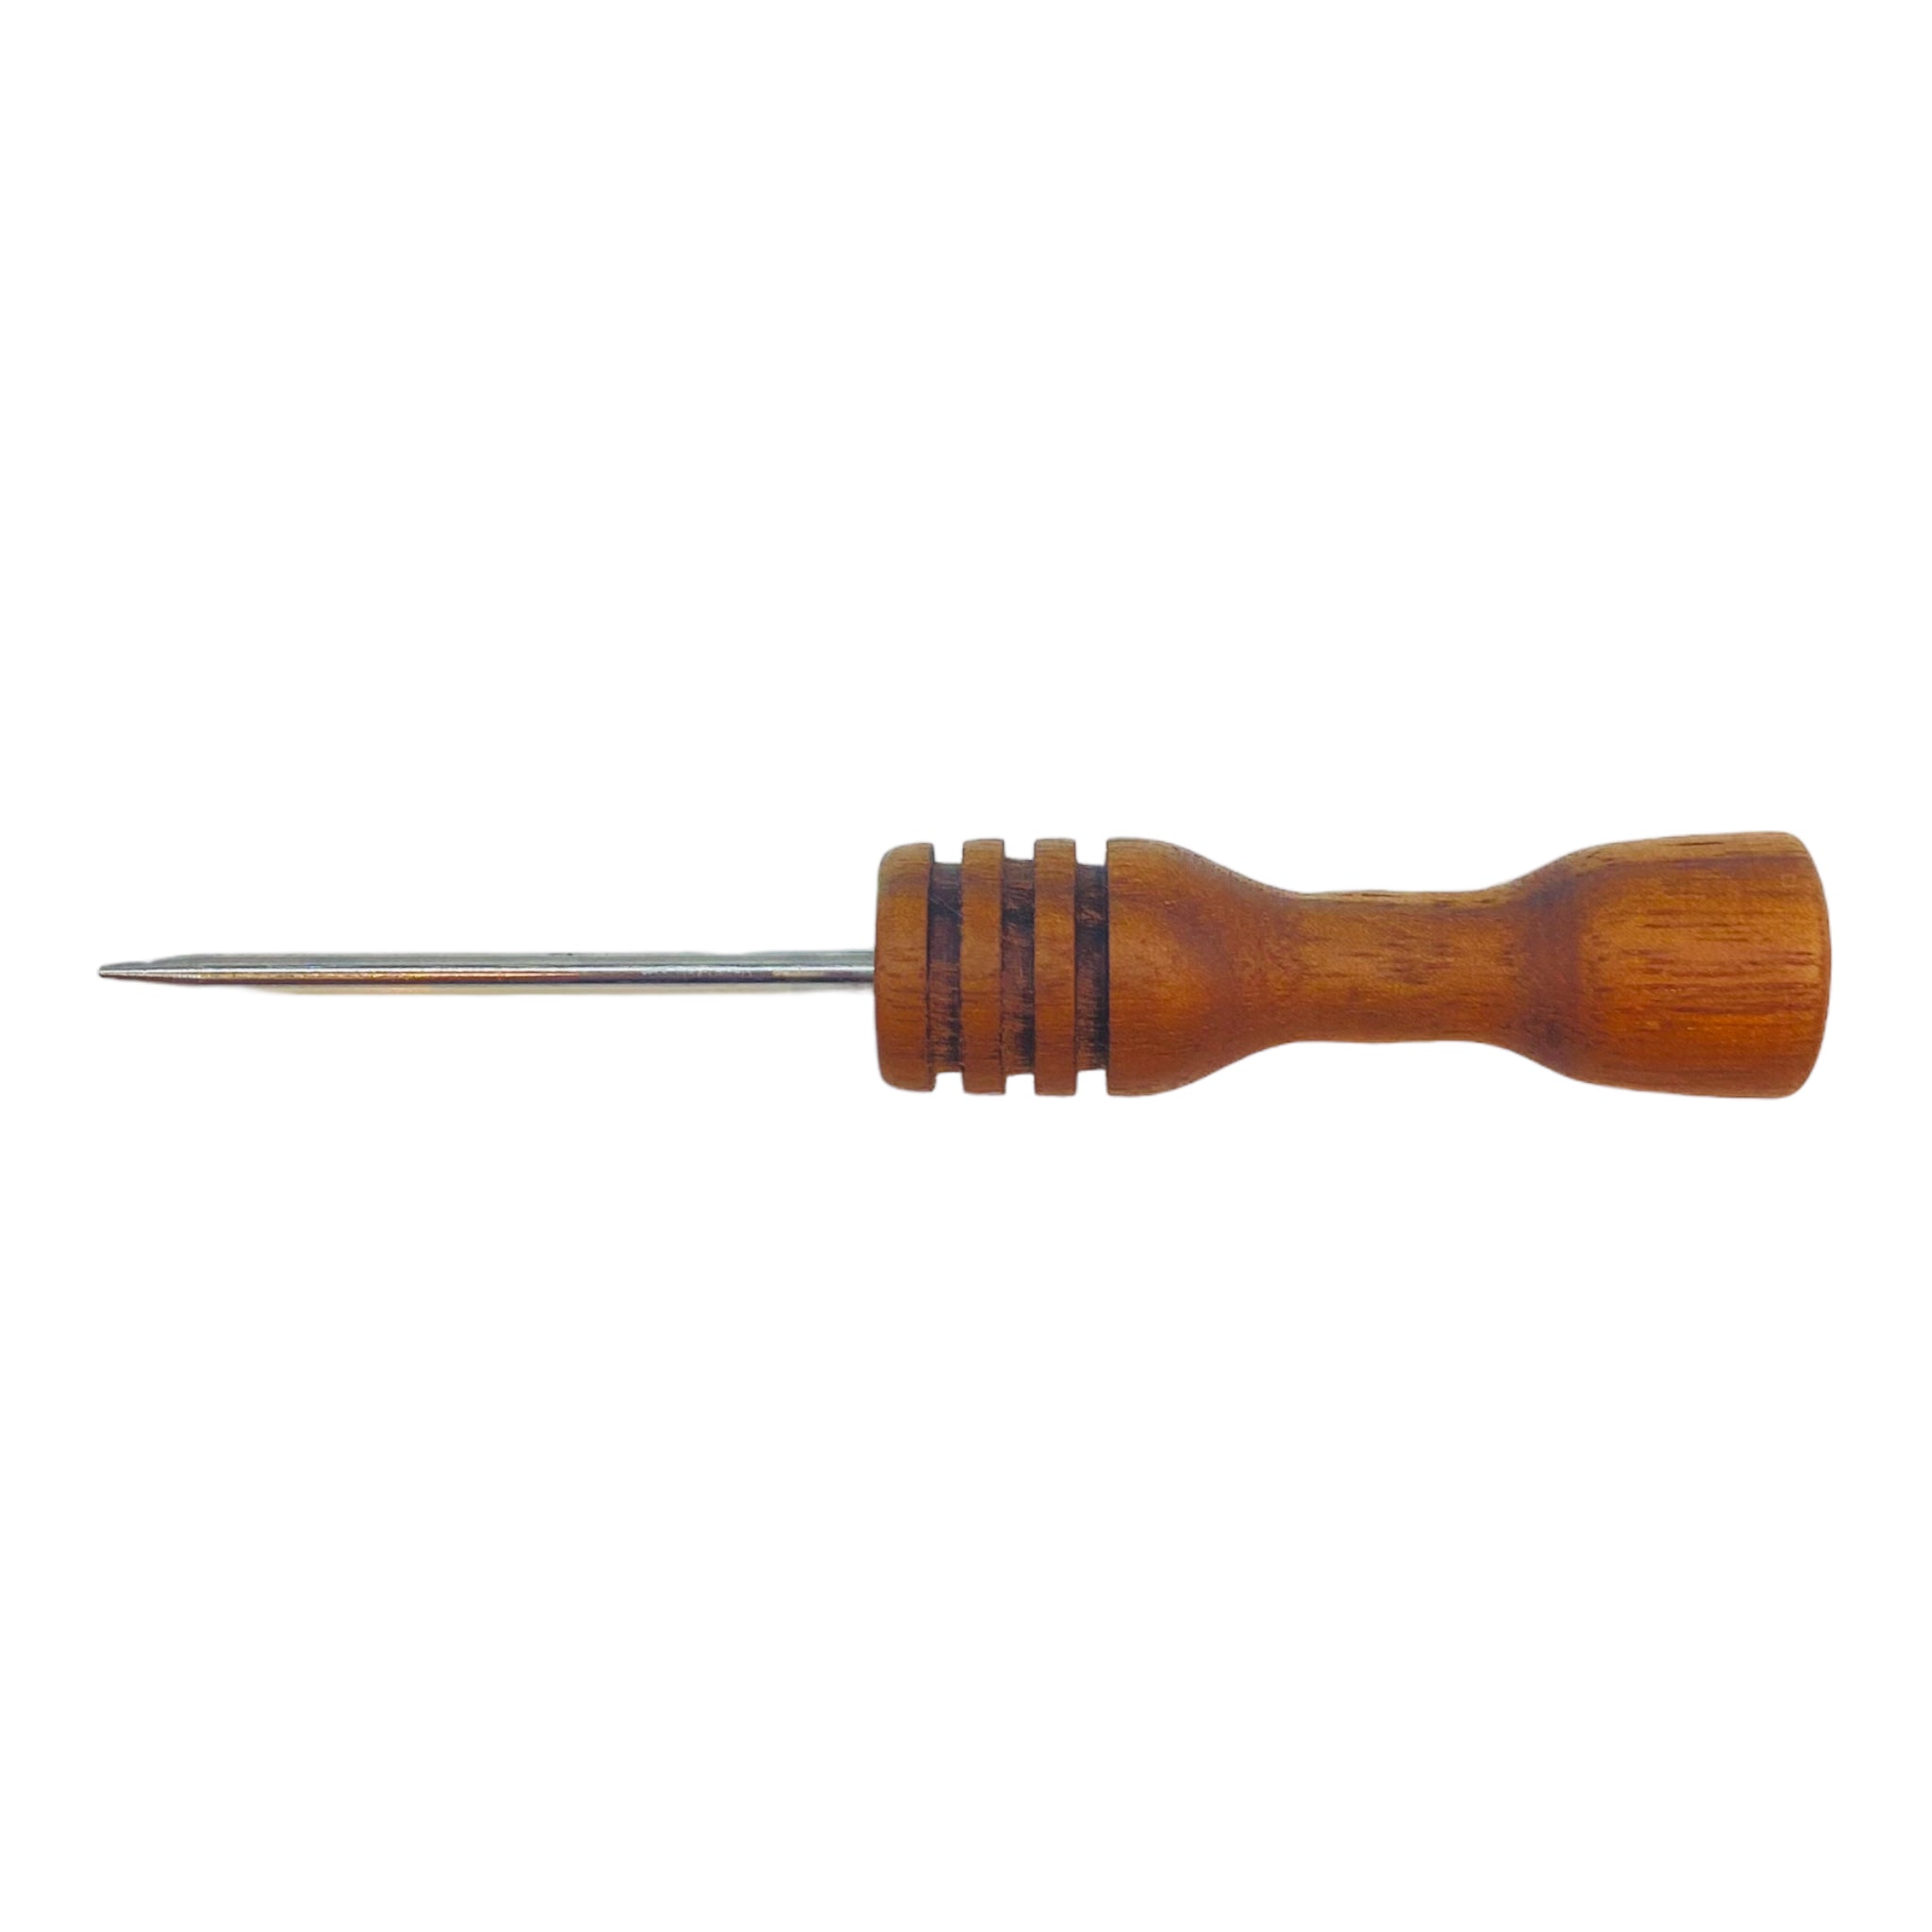 Mahogany Woodturned Dab Tool Or Pipe Poker With Honey Collecter Handle